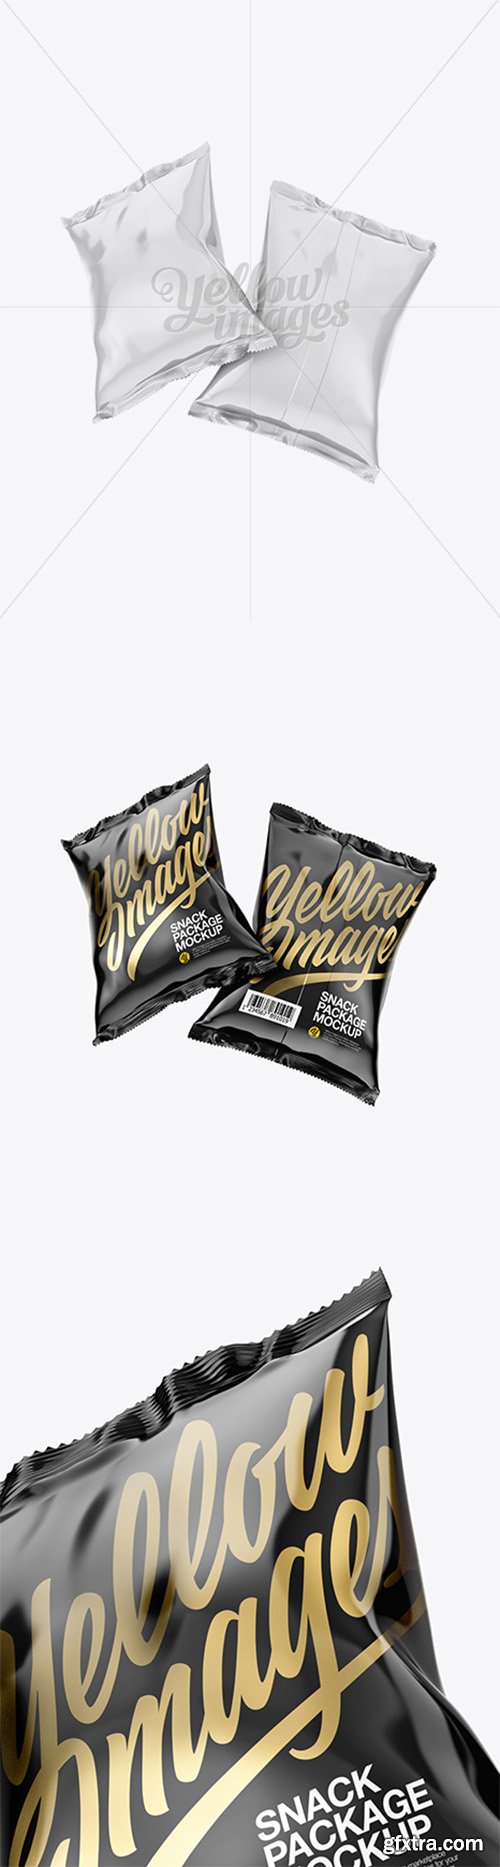 Two Glossy Snack Packages Mockup 18320